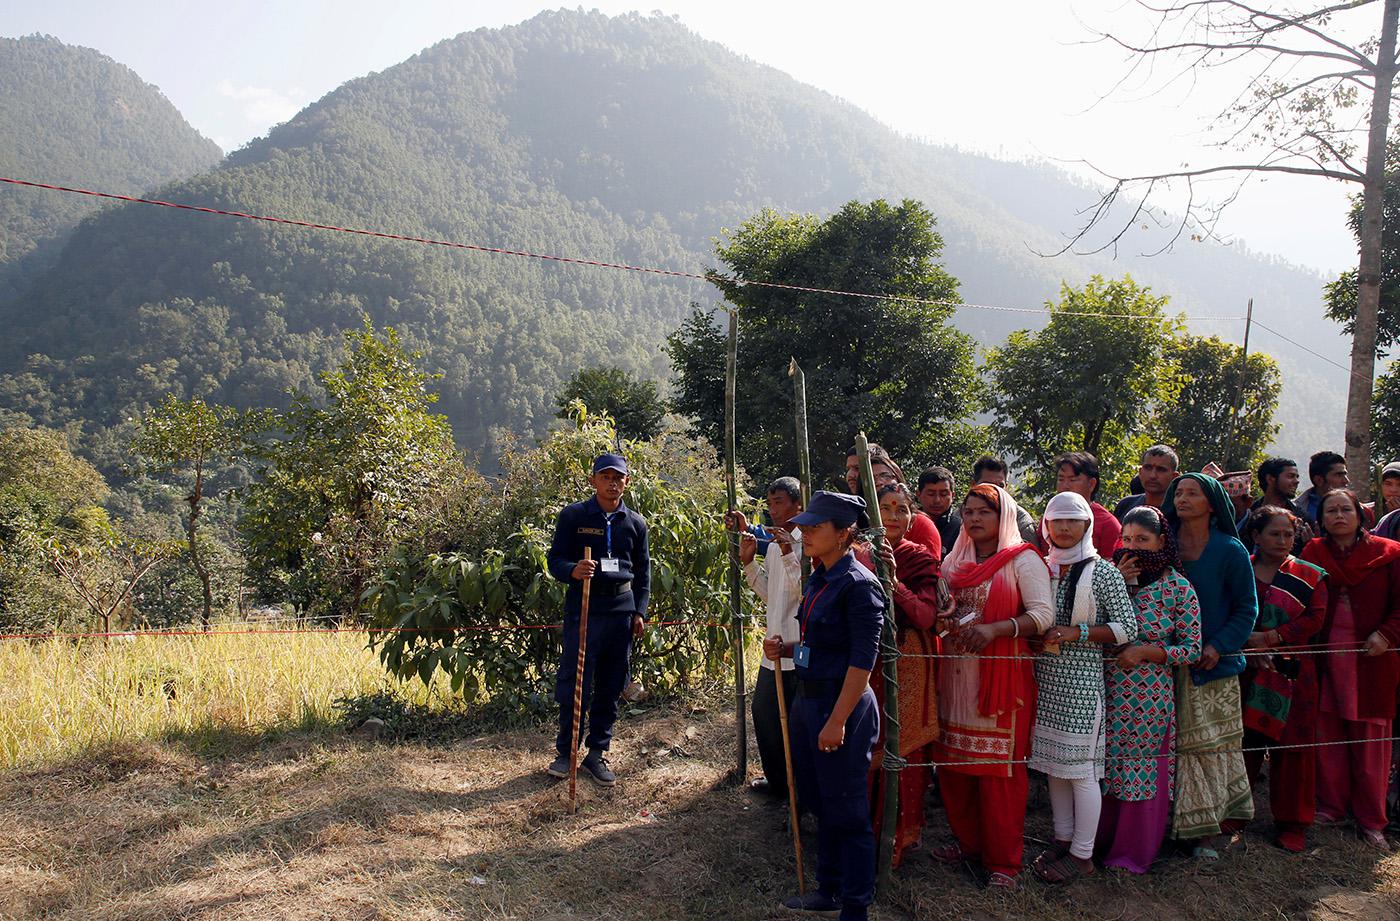 Villagers wait to vote at a polling station during the parliamentary and provincial elections in Sindhupalchok district, Nepal, November 26, 2017.